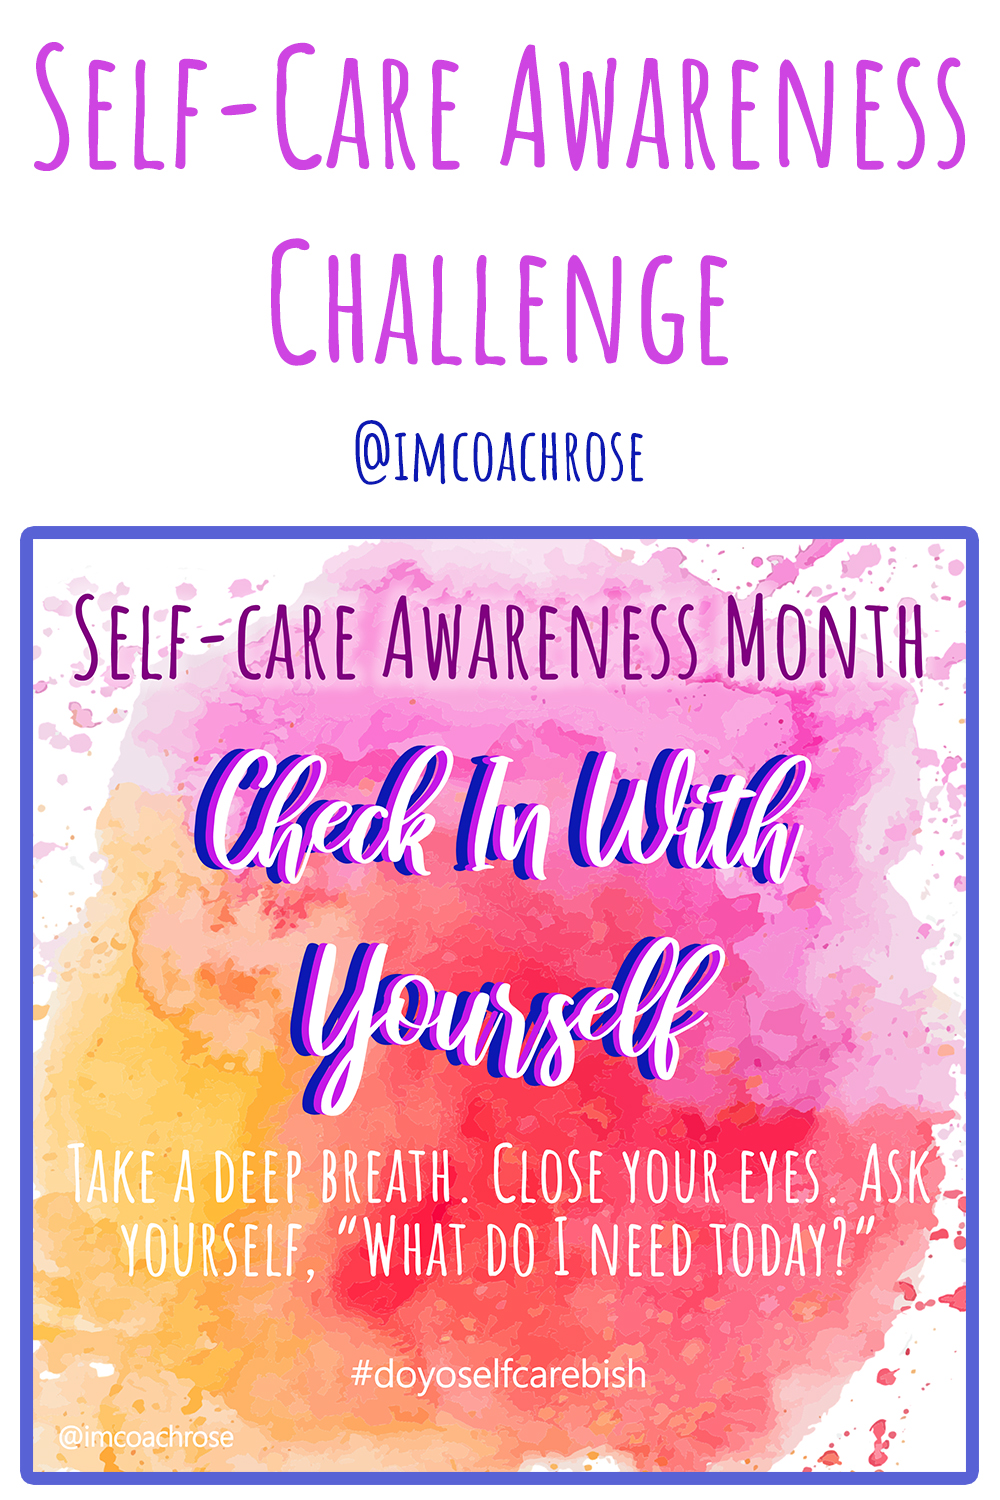 Self-Care Awareness Month: Check In With Yourself